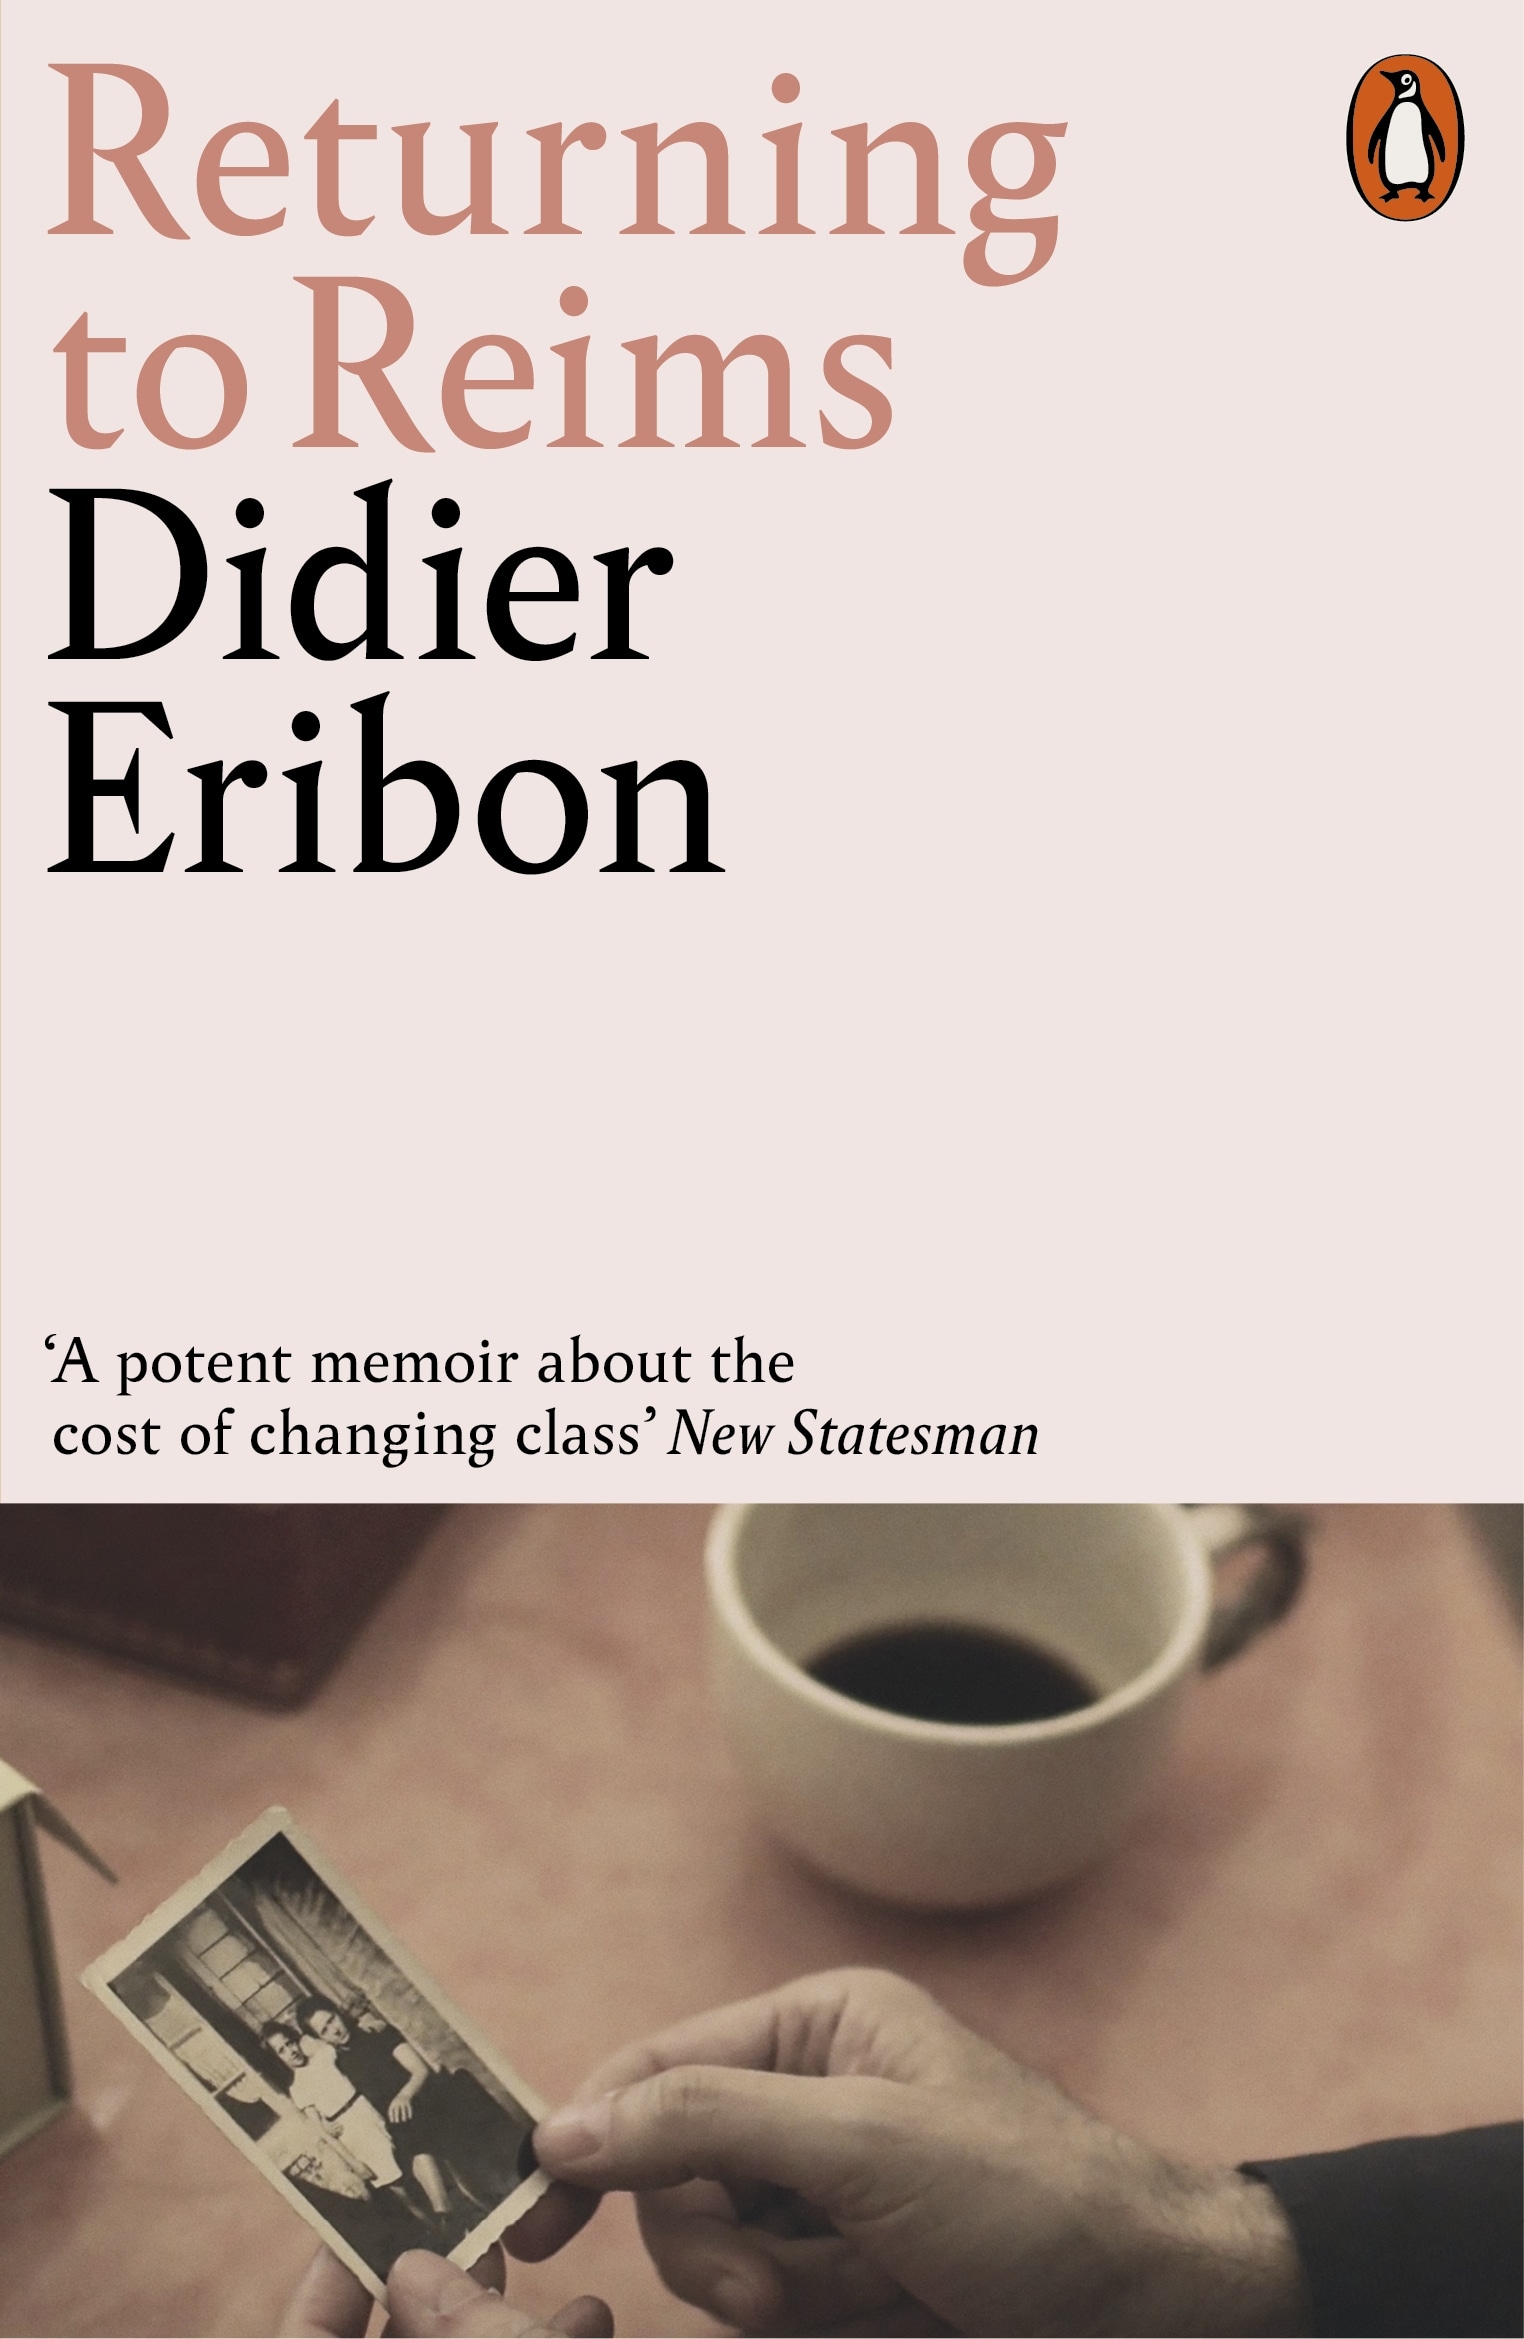 Book “Returning to Reims” by Didier Eribon — April 4, 2019